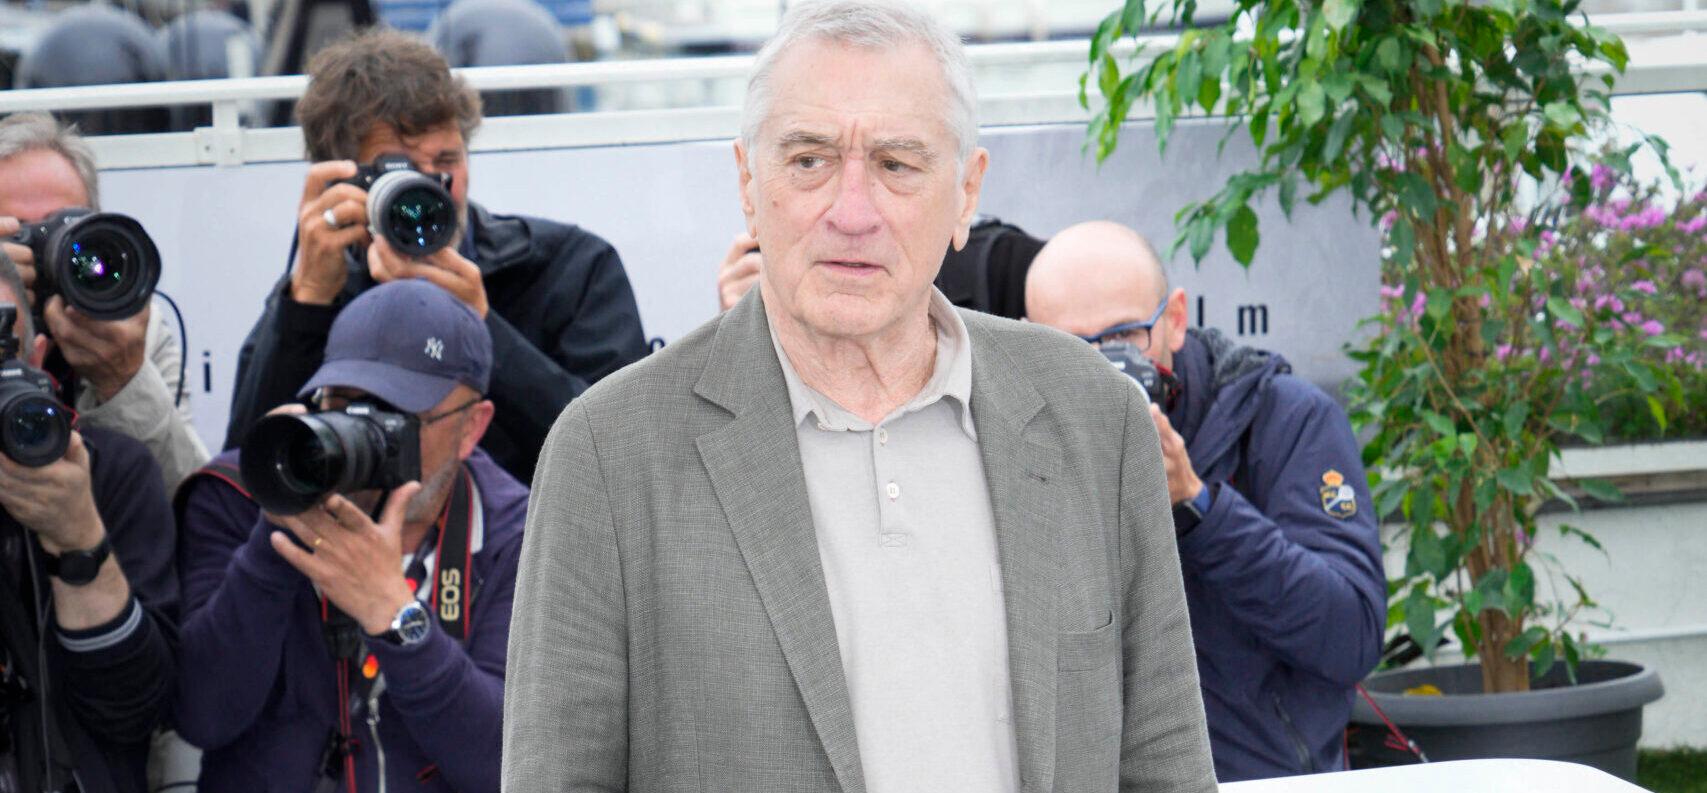 Robert De Niro's Company Ordered To Pay Ex-Assistant A Shocking $1.2 Million